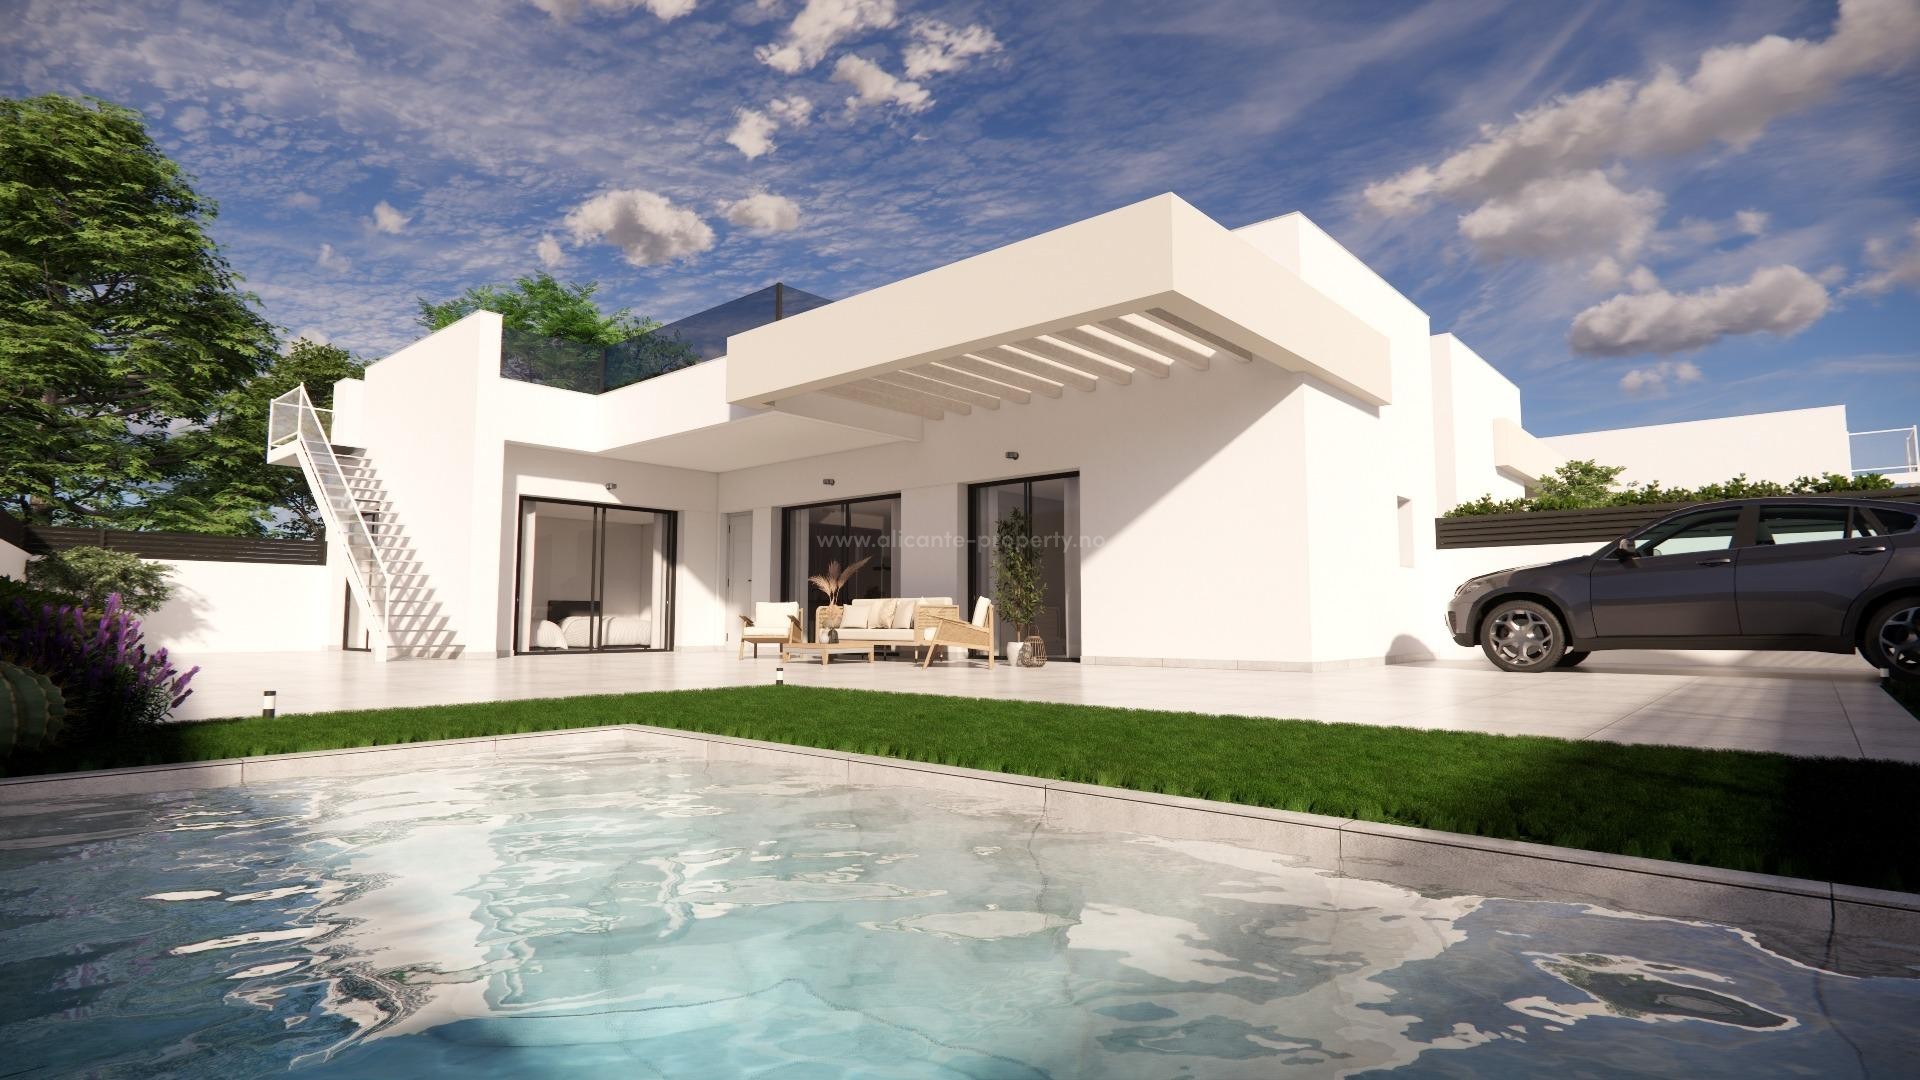 Villas in Los Montesinos, Alicante, 3 bedrooms, 3 bathrooms, open plan kitchen with living room and terrace, possibilities for private pool and solarium.